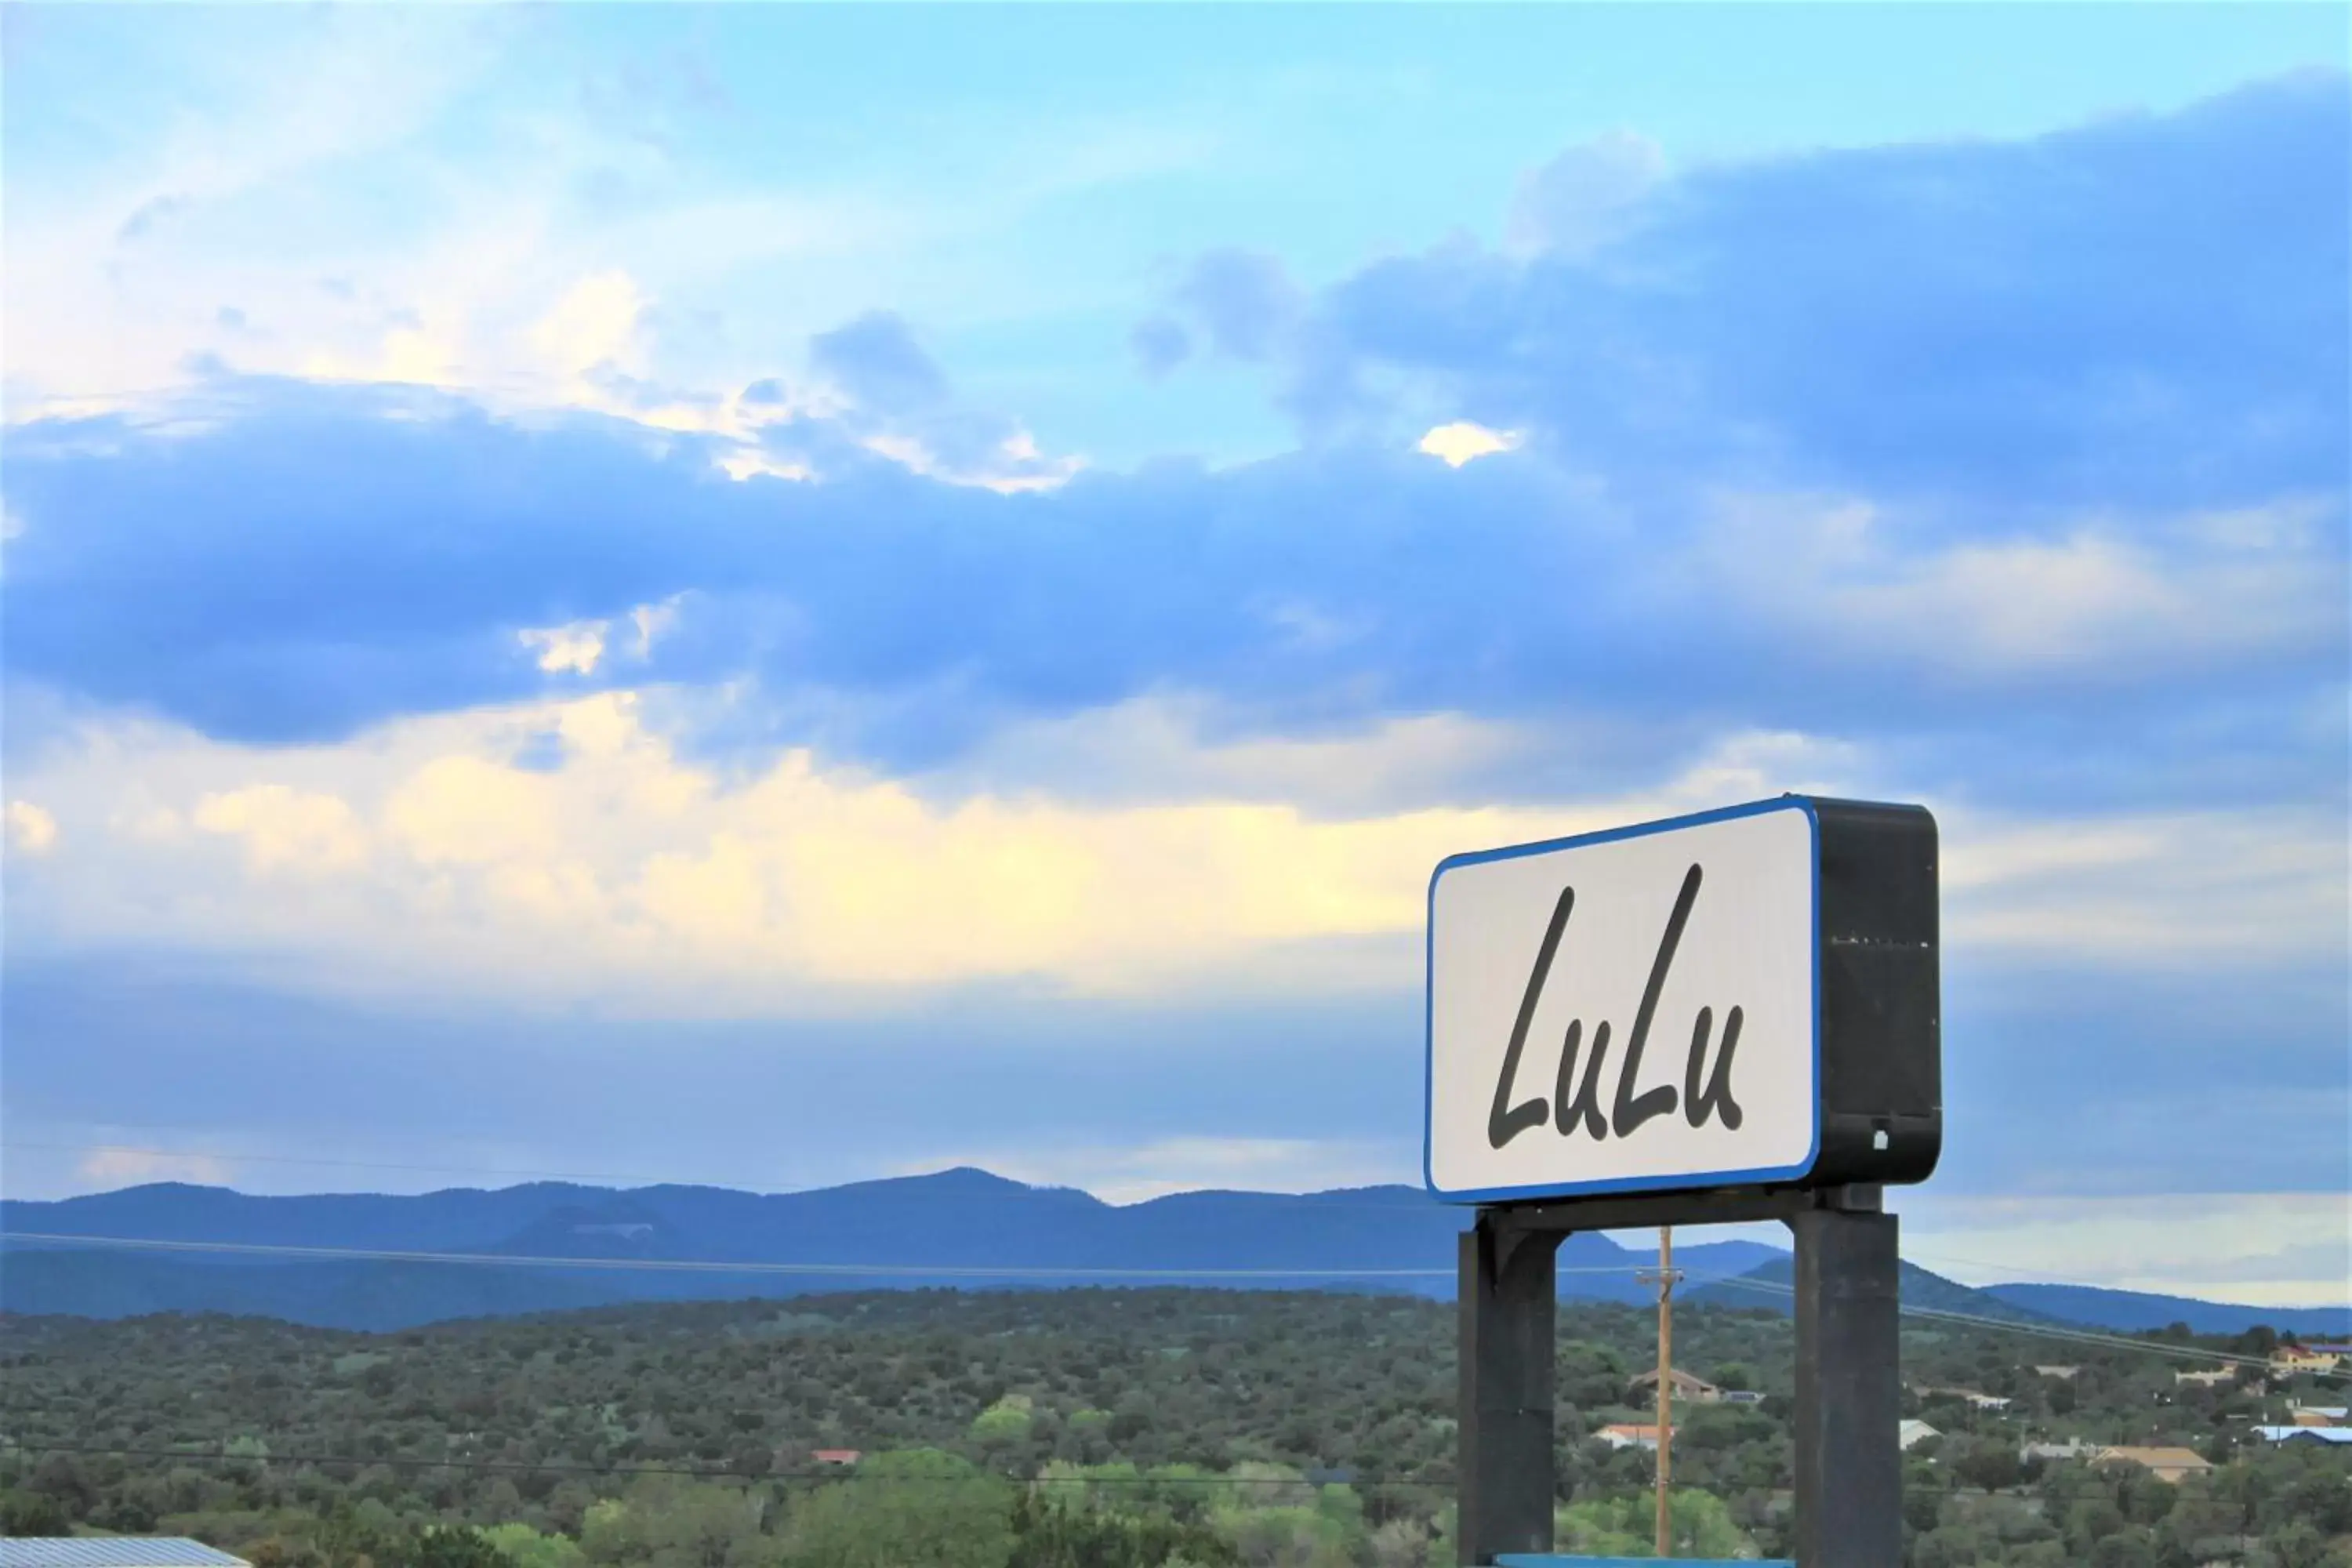 Property logo or sign in LuLu Silver City